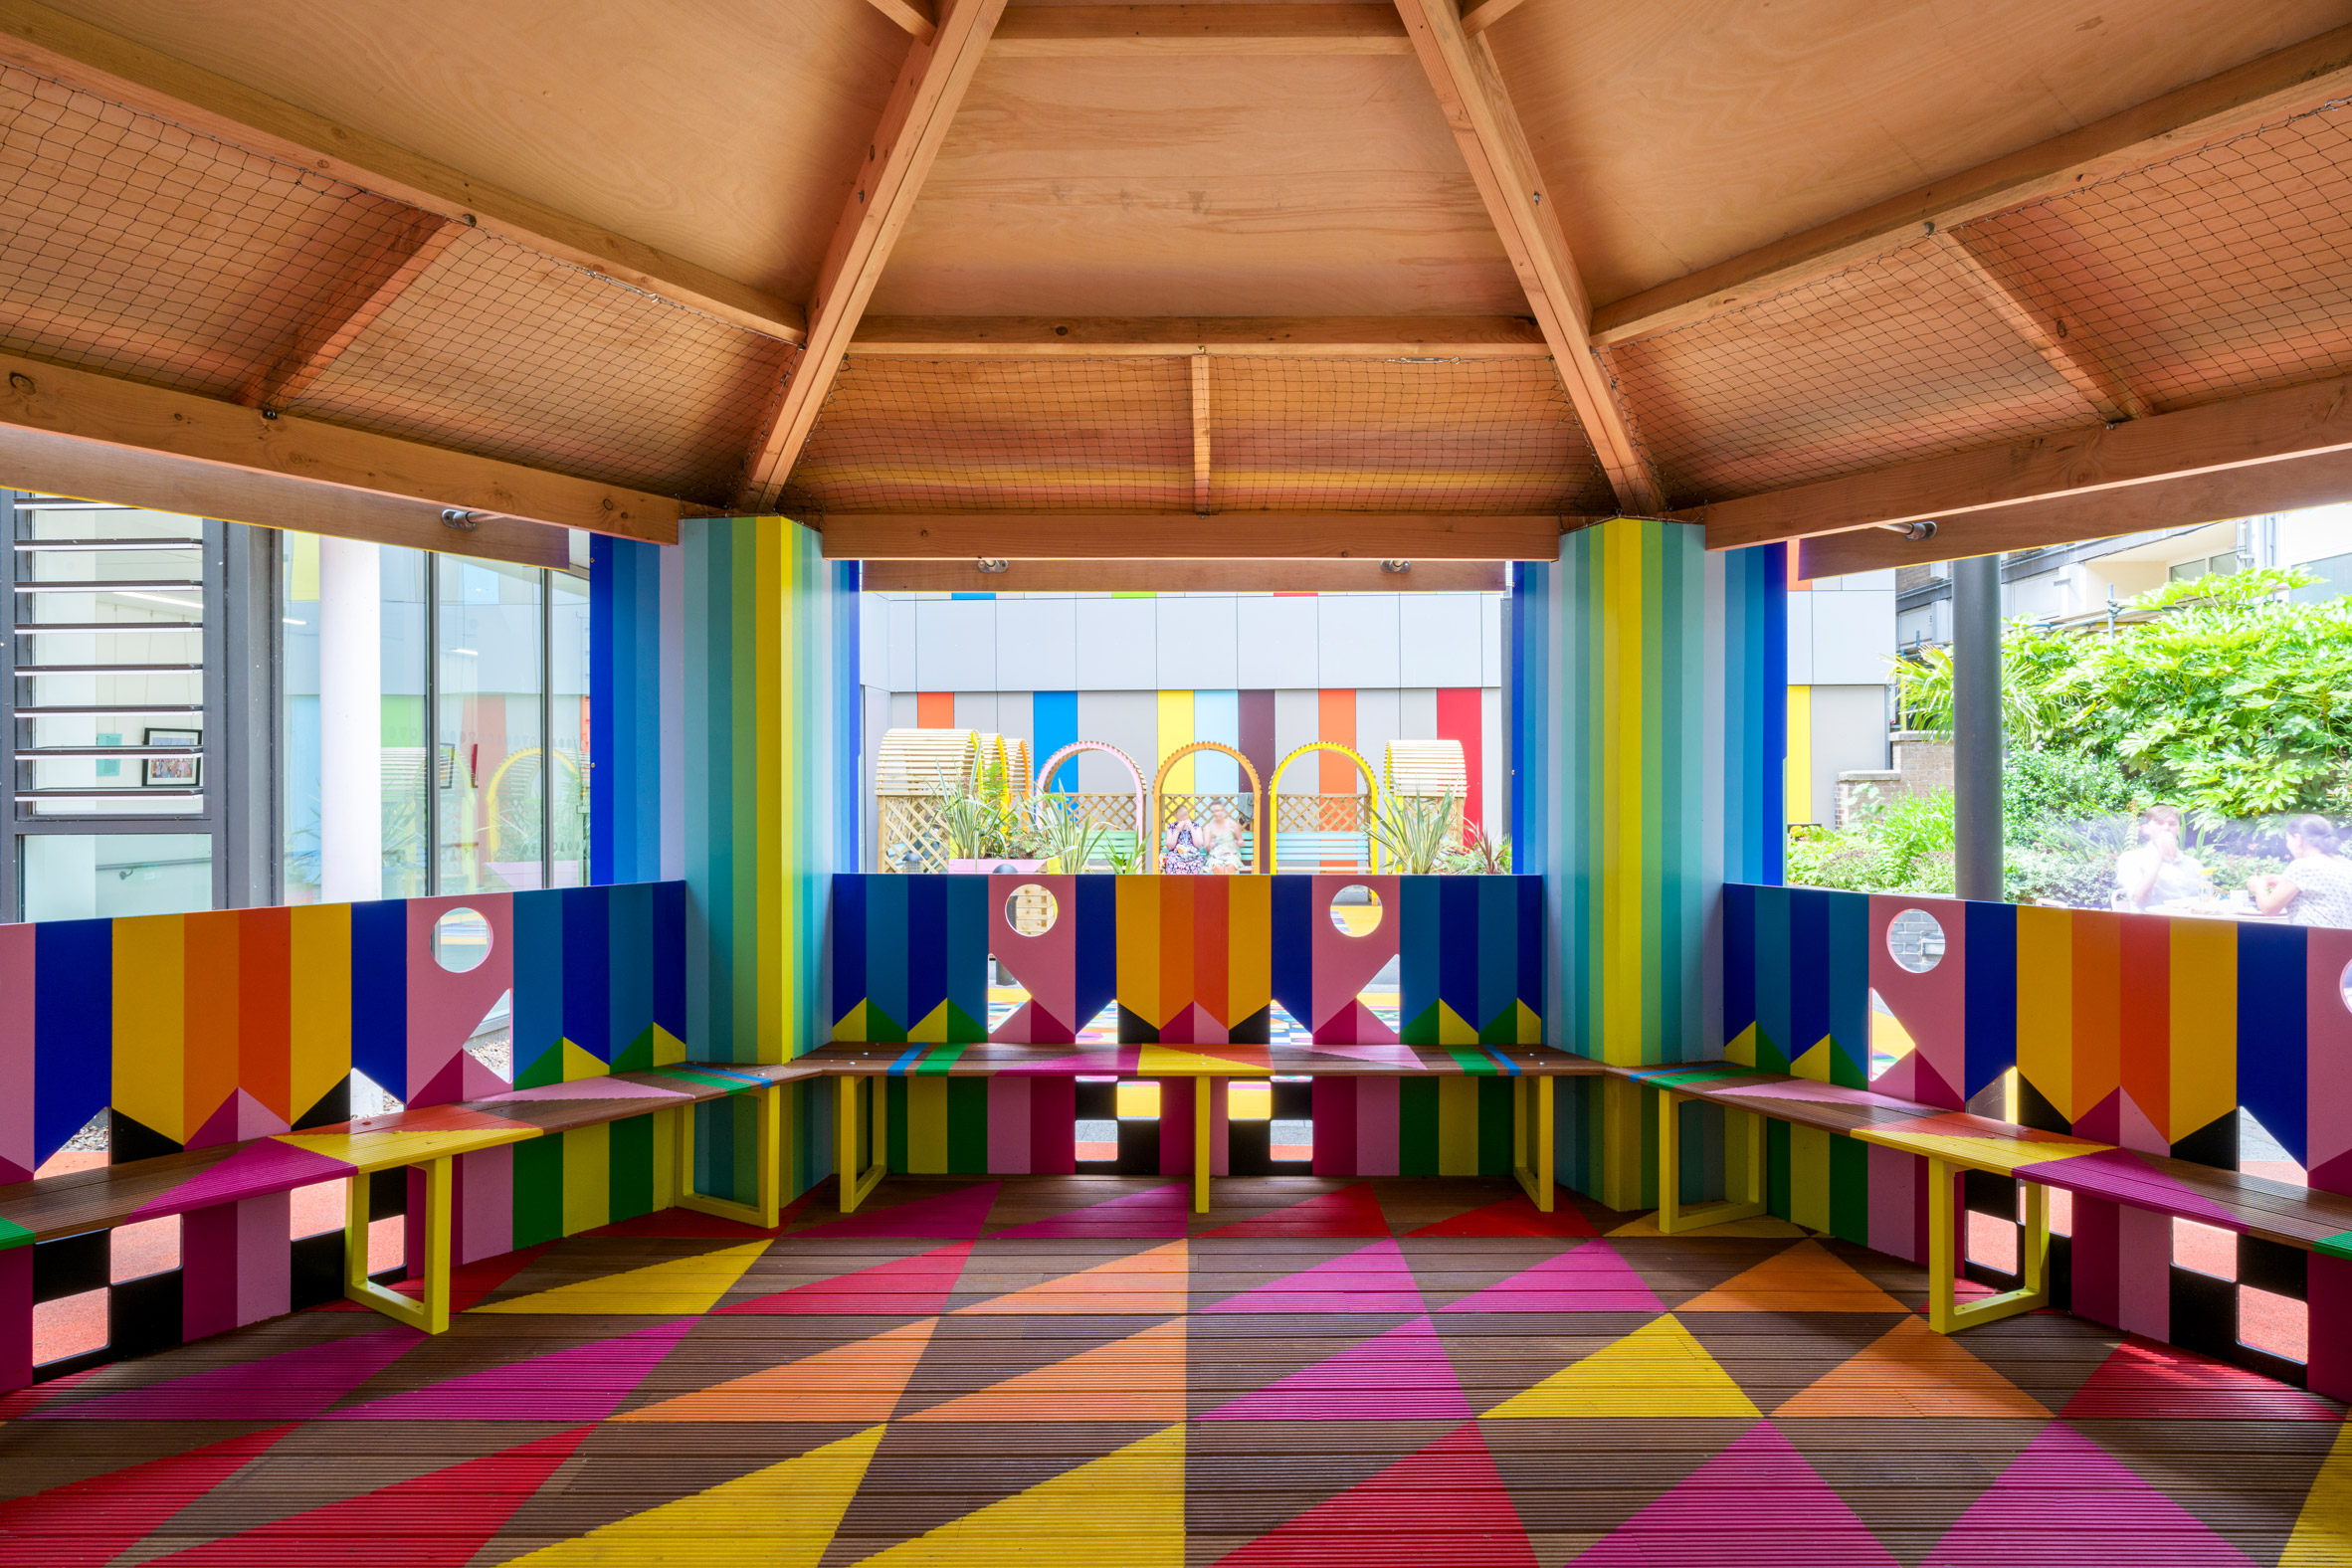 Interior of wooden pavilion by Morag Myerscough